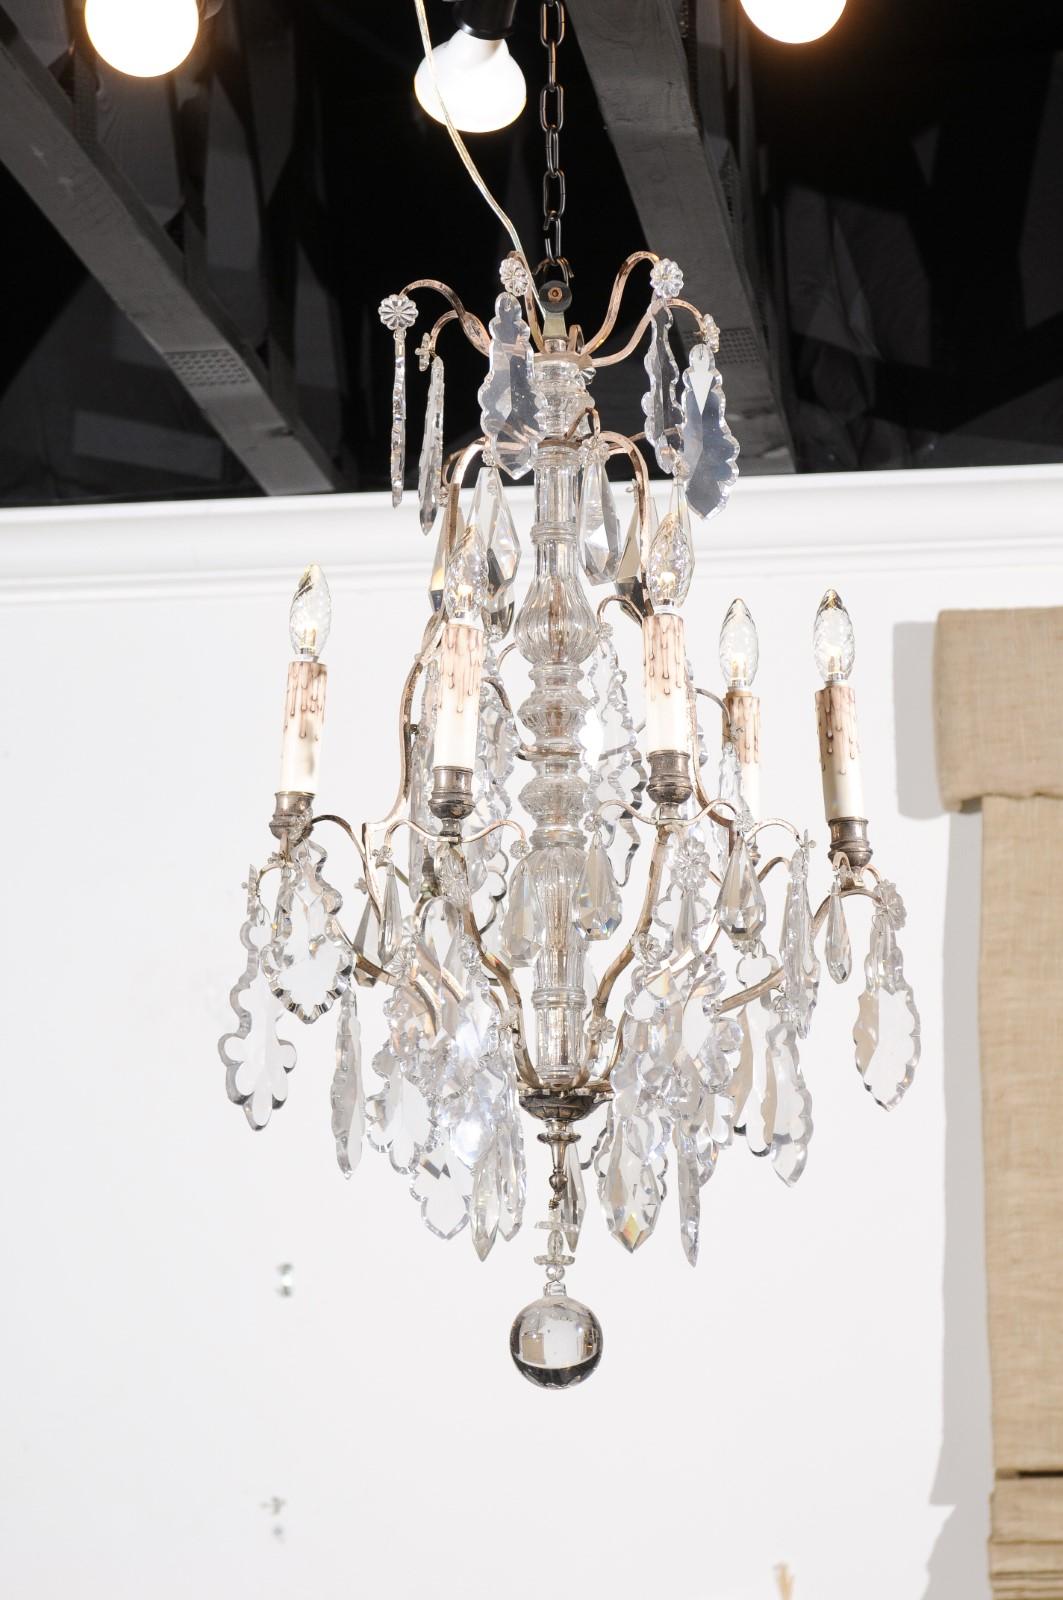 A French six-light crystal silvered chandelier from the 19th century with central column, pendeloques and lower finial. Born in France during the 19th century, this exquisite crystal chandelier features a central crystal column connected to a